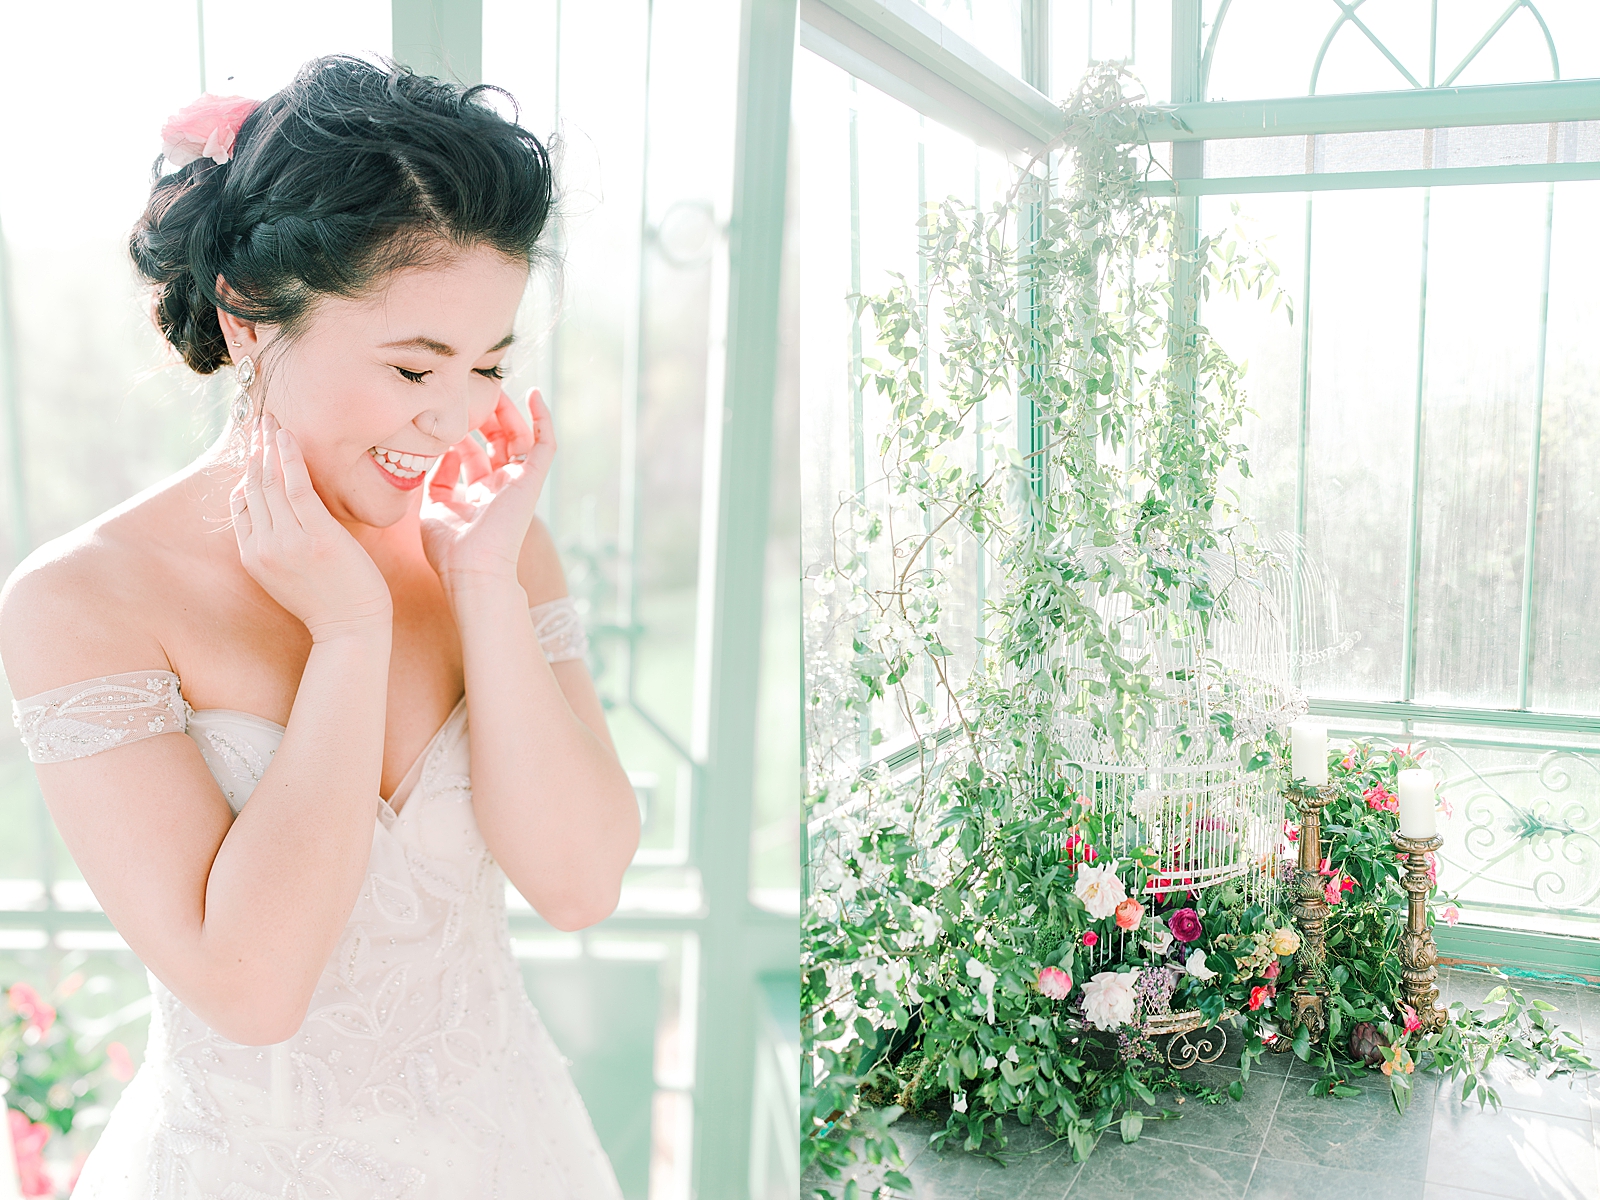 2400 On The River Bridal Session Lily giggling and detail of florals in birdcage Photos